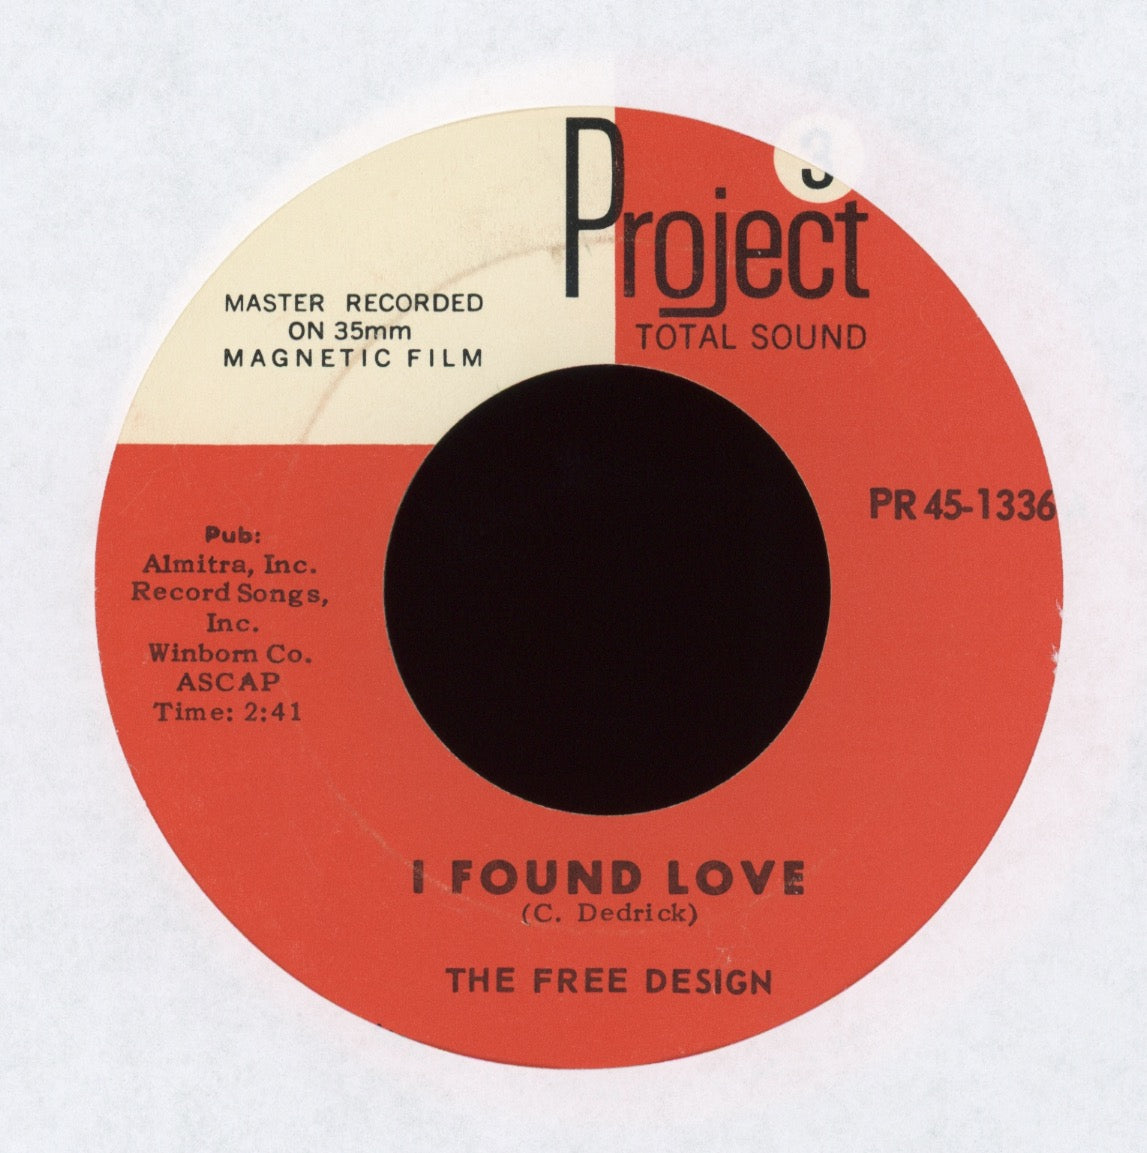 The Free Design - I Found Love on Project 3